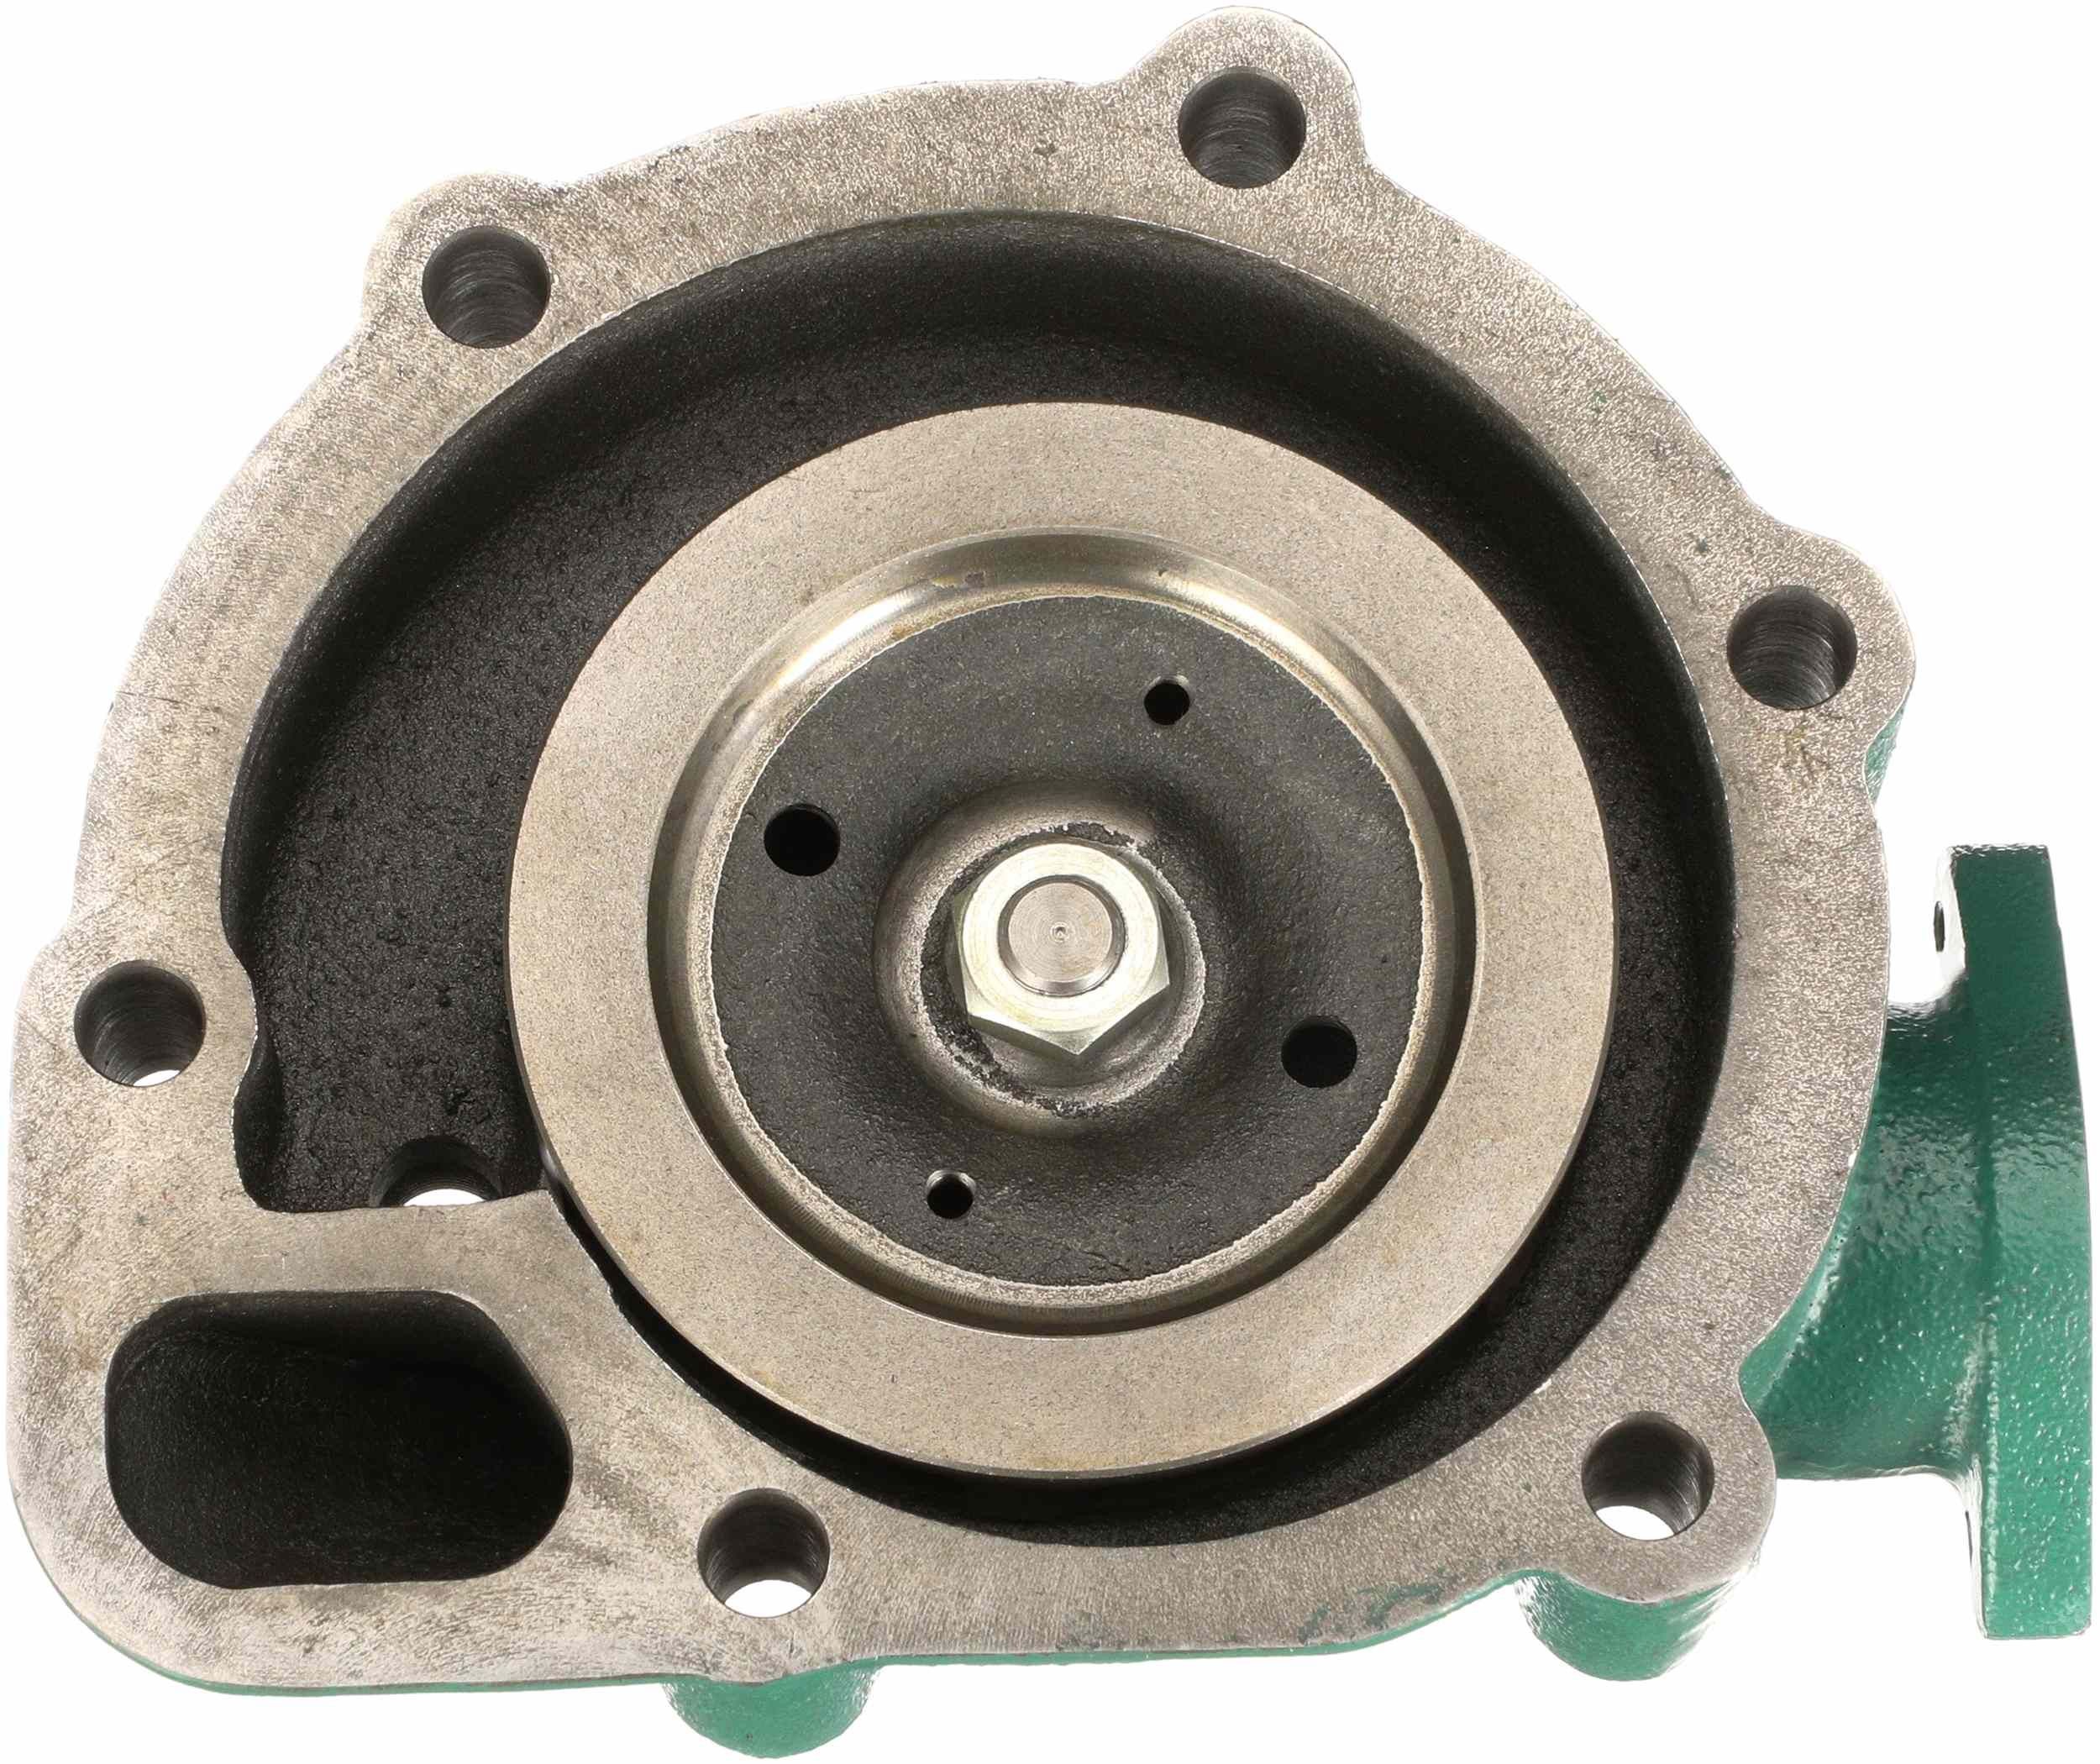 GATES 7702-15090 Water pump Metal, without belt pulley, for v-belt pulley, with gaskets/seals